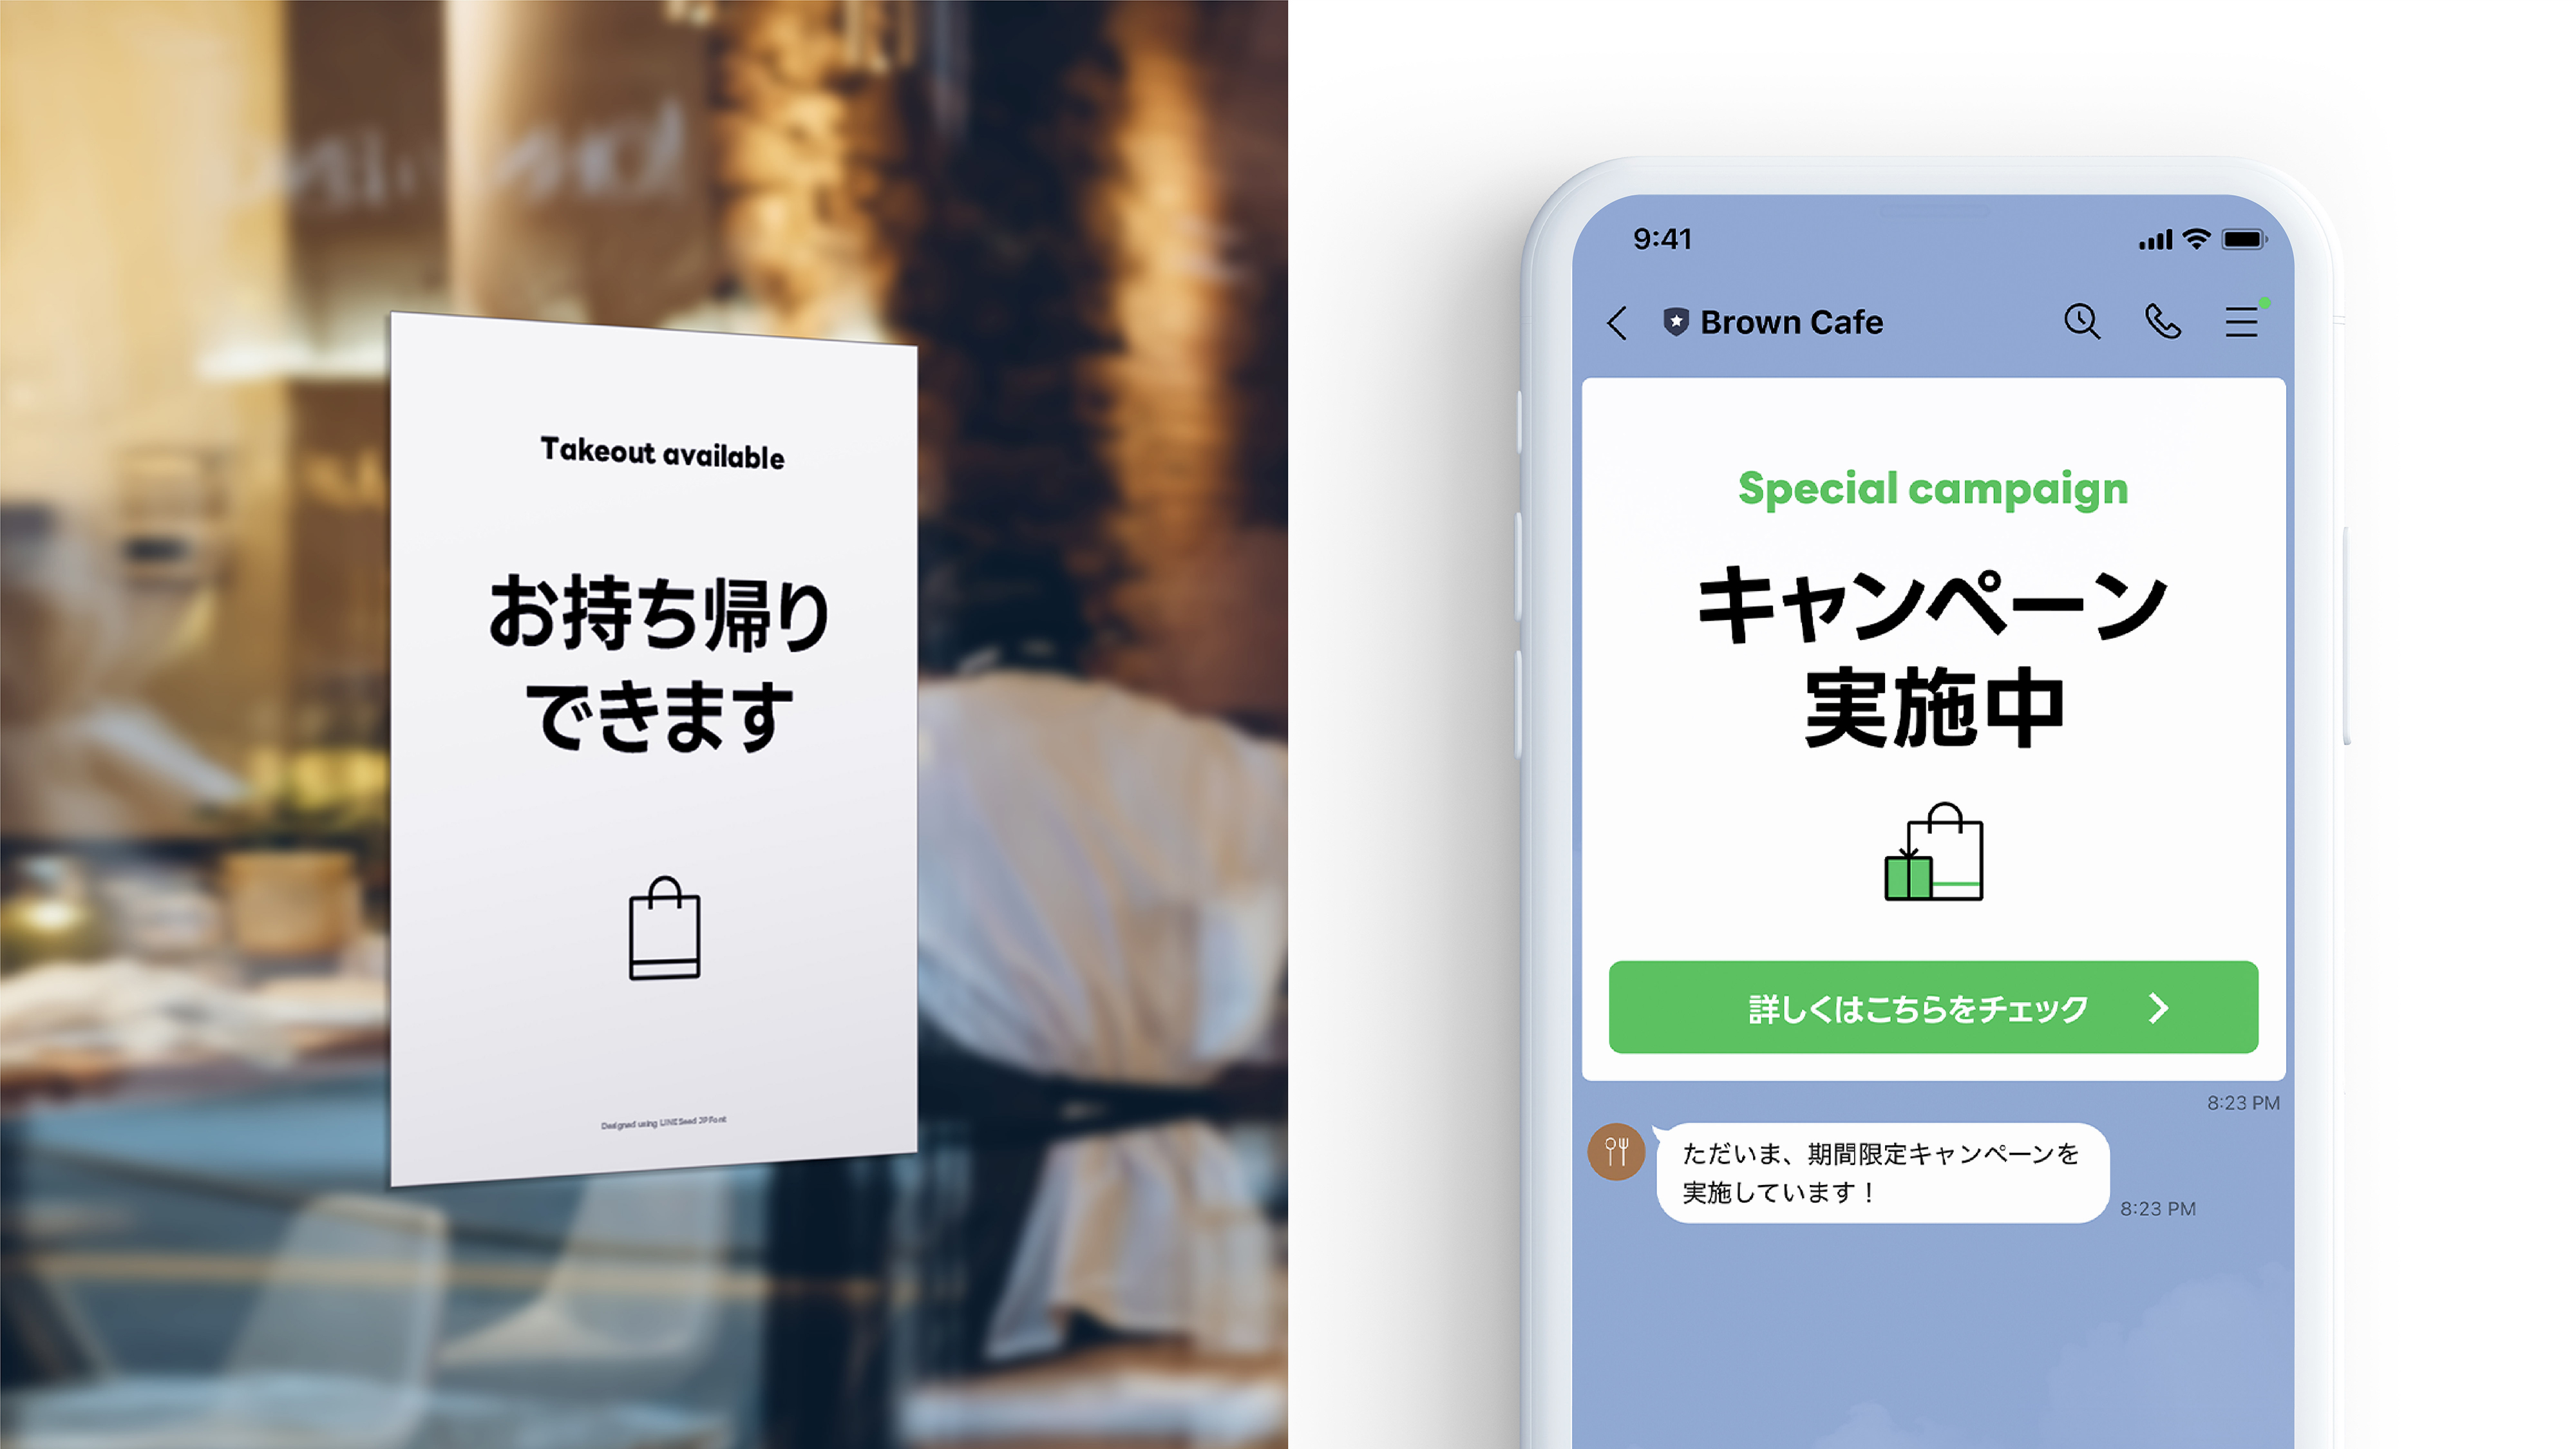 LINE Seed JP - Typeface development and promotion